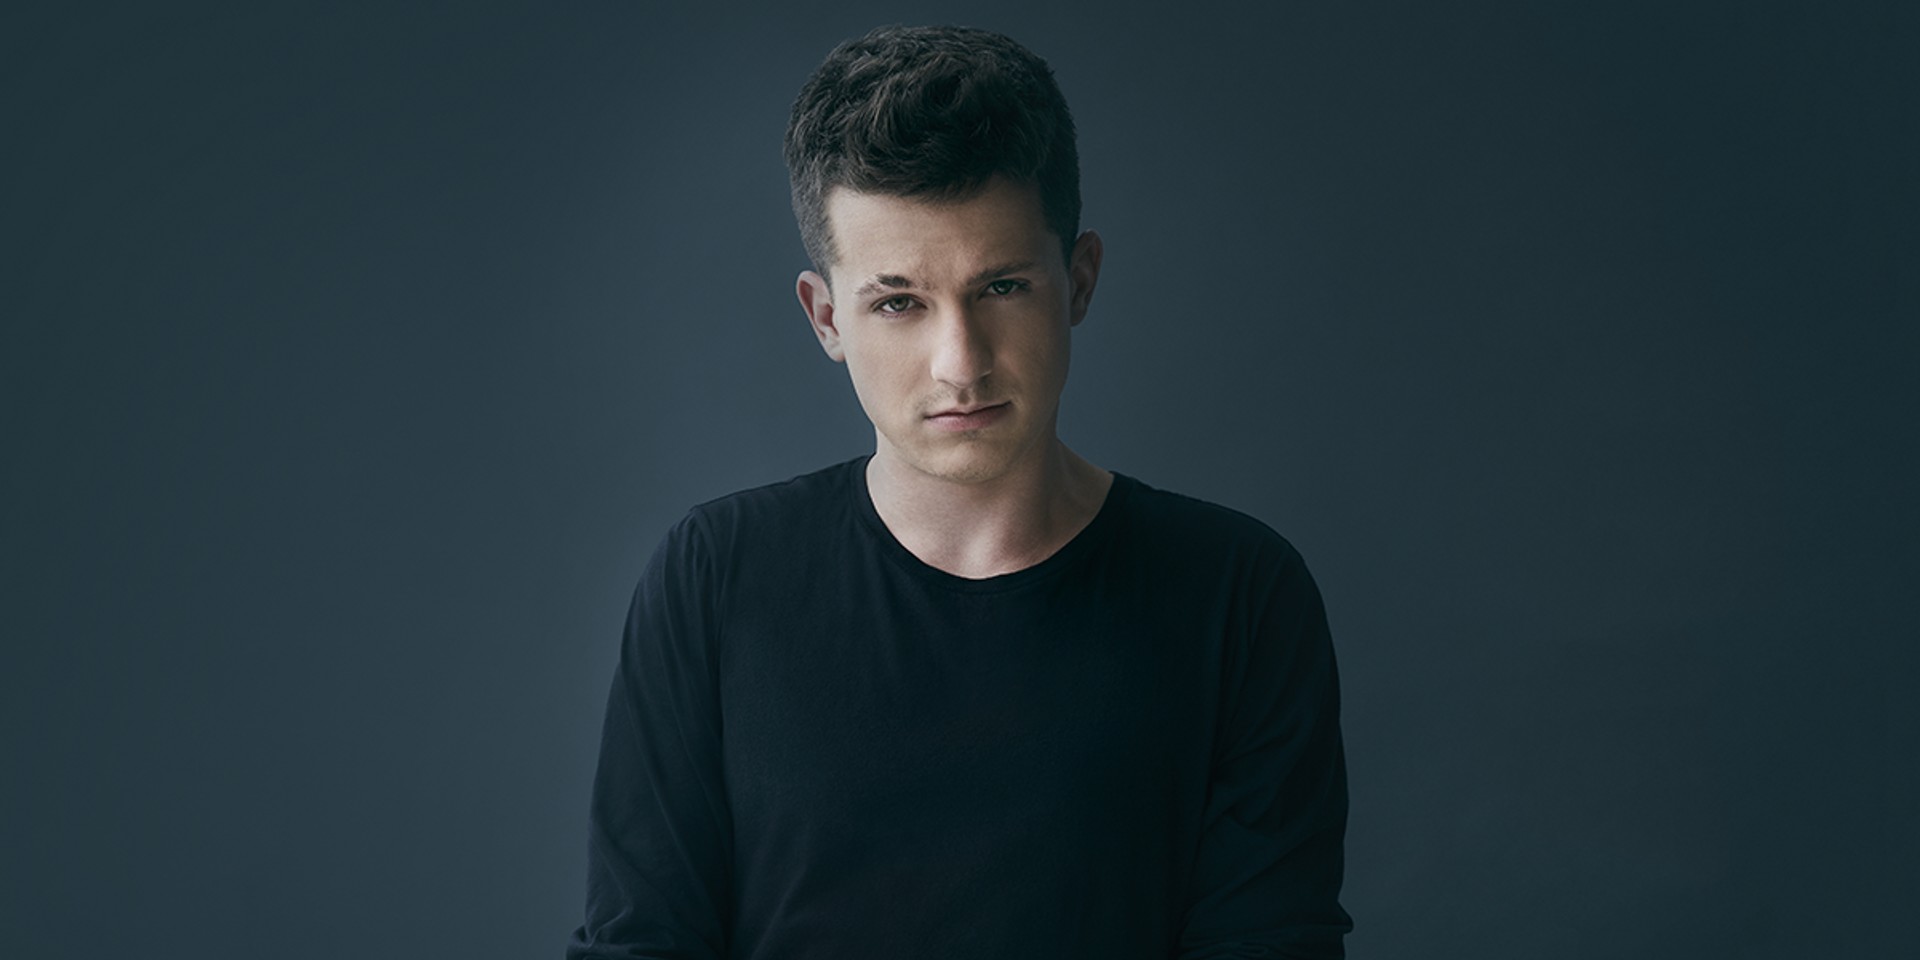 Charlie Puth announces Southeast Asia tour – shows in Singapore, Hong Kong, Bangkok and more confirmed